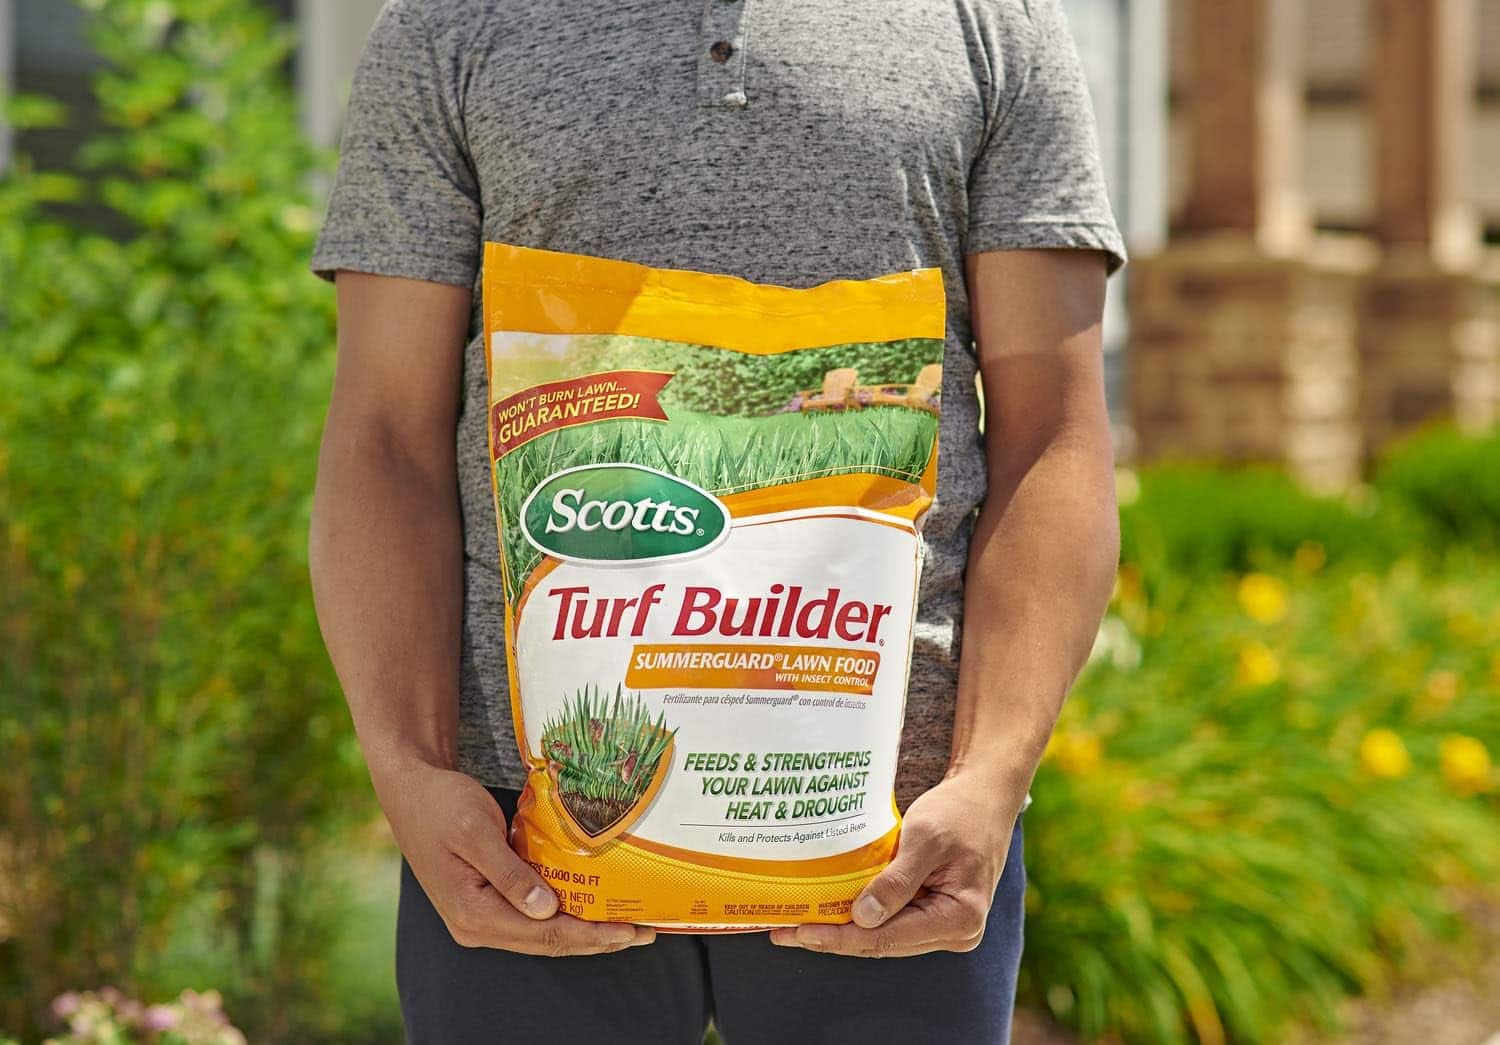 Scotts Turf Builder SummerGuard Lawn Food with Insect Control Review